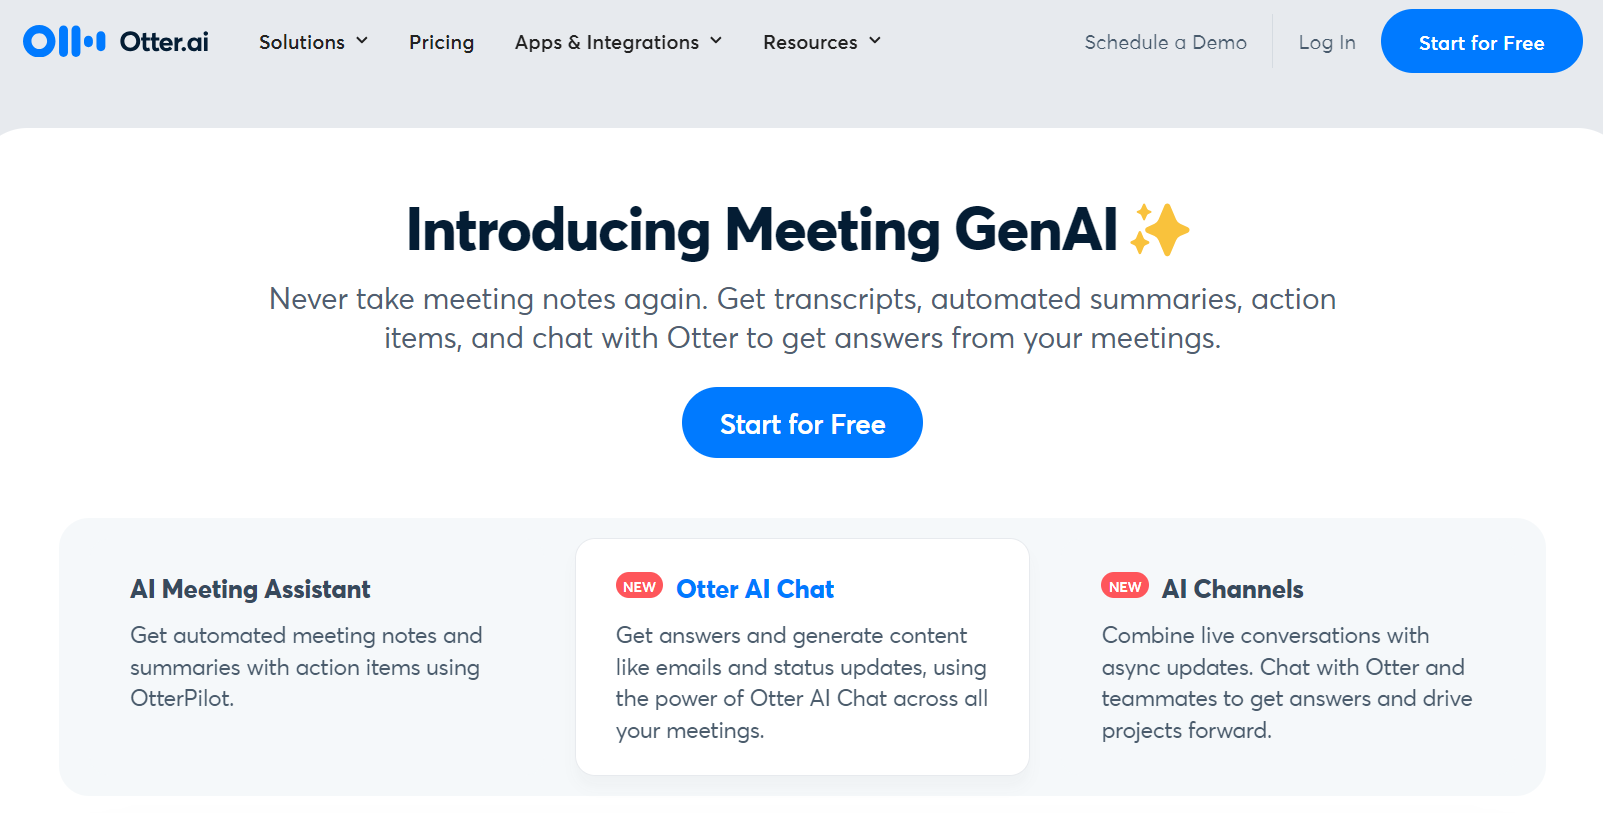 Web page section from Otter.ai introducing 'Meeting GenAI', an AI tool designed to streamline meeting productivity. 